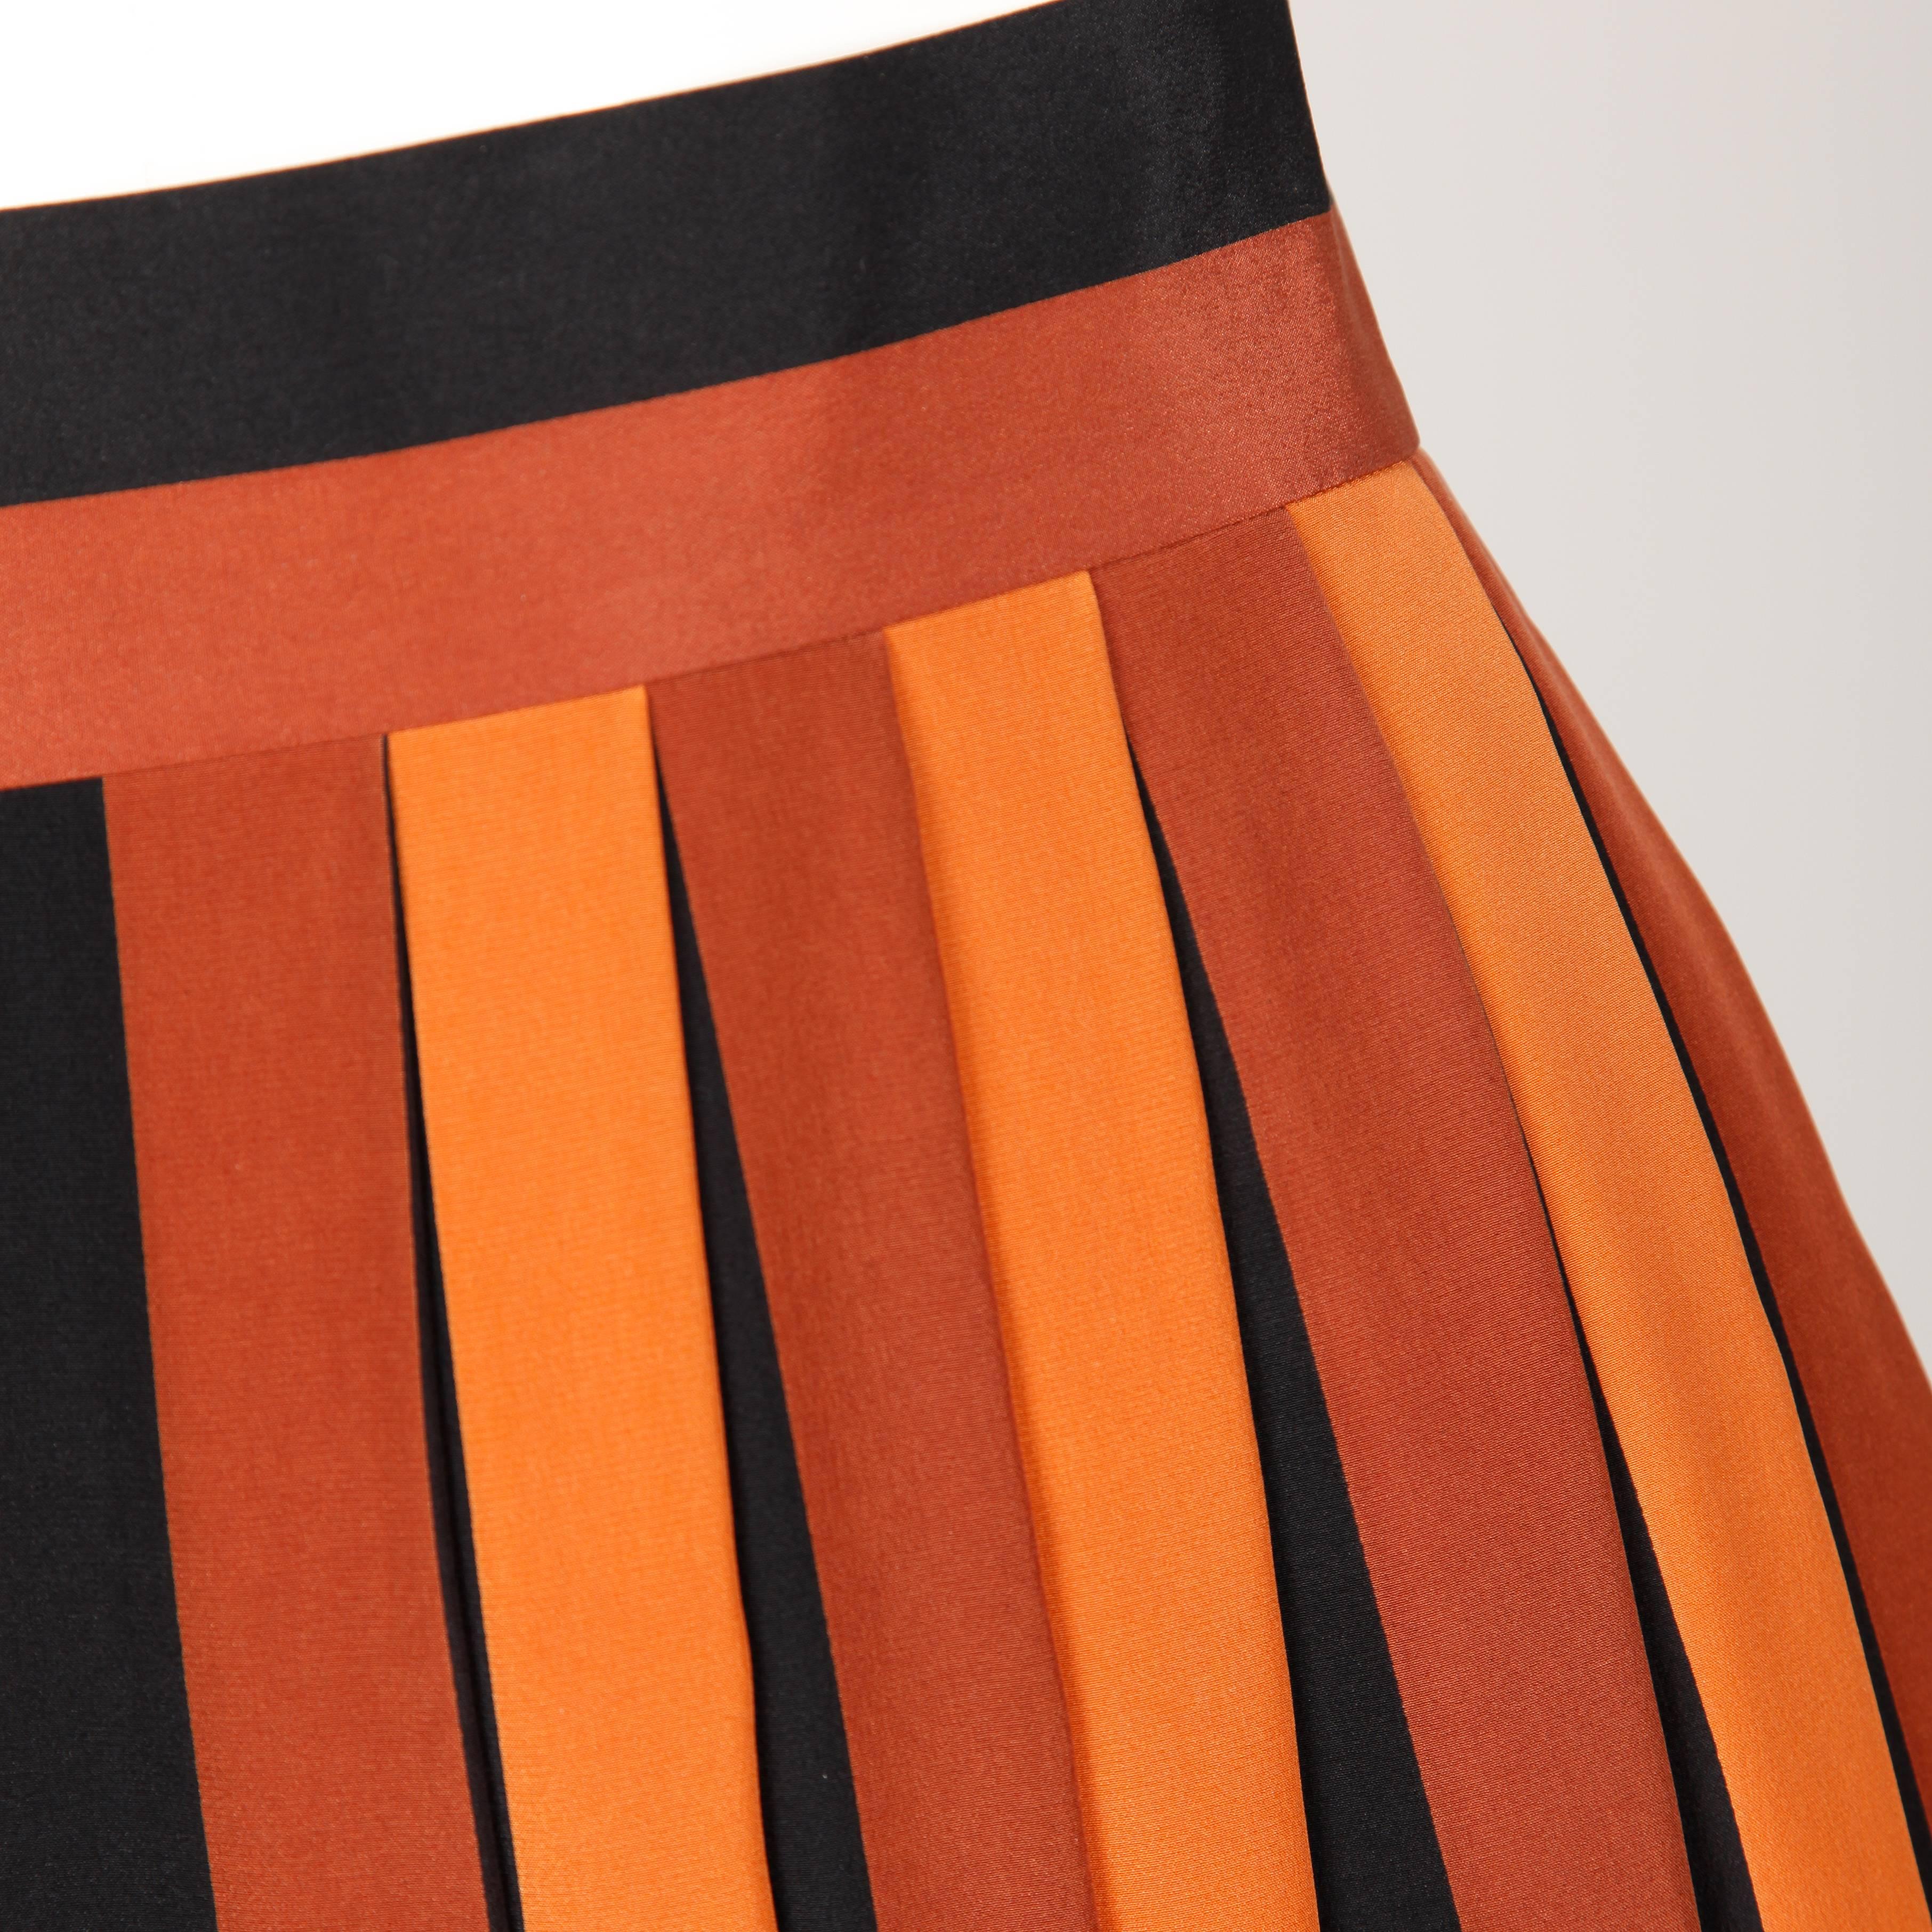 Wonderful 1970s silk pleated color block skirt by Givenchy. Rust, black, white, neutral and orange colors with inverted pleats and a striped waistband. Marked size 38, fits like a modern size small. 100% Silk. Unlined with zip and hook closure. Made